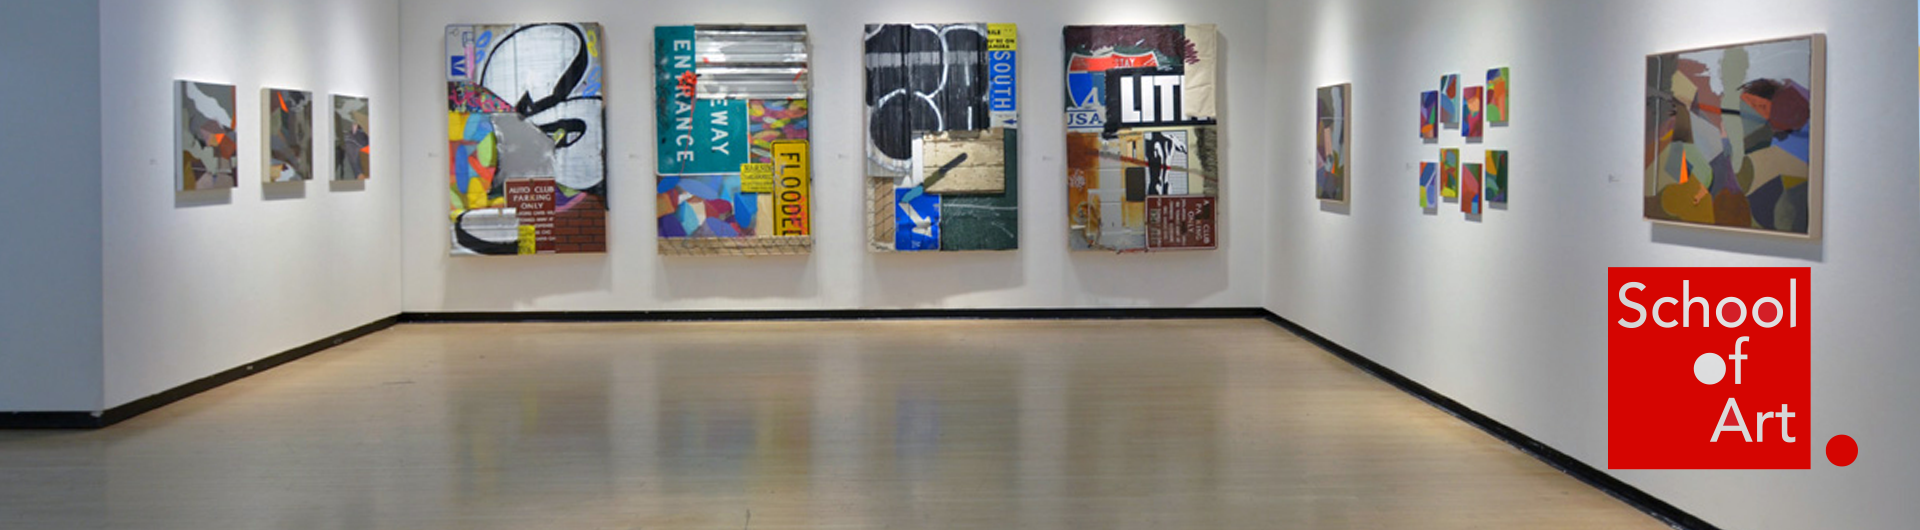 Gallery walls. Main view is four large mixed media pieces depicting road signs and graffiti art. 